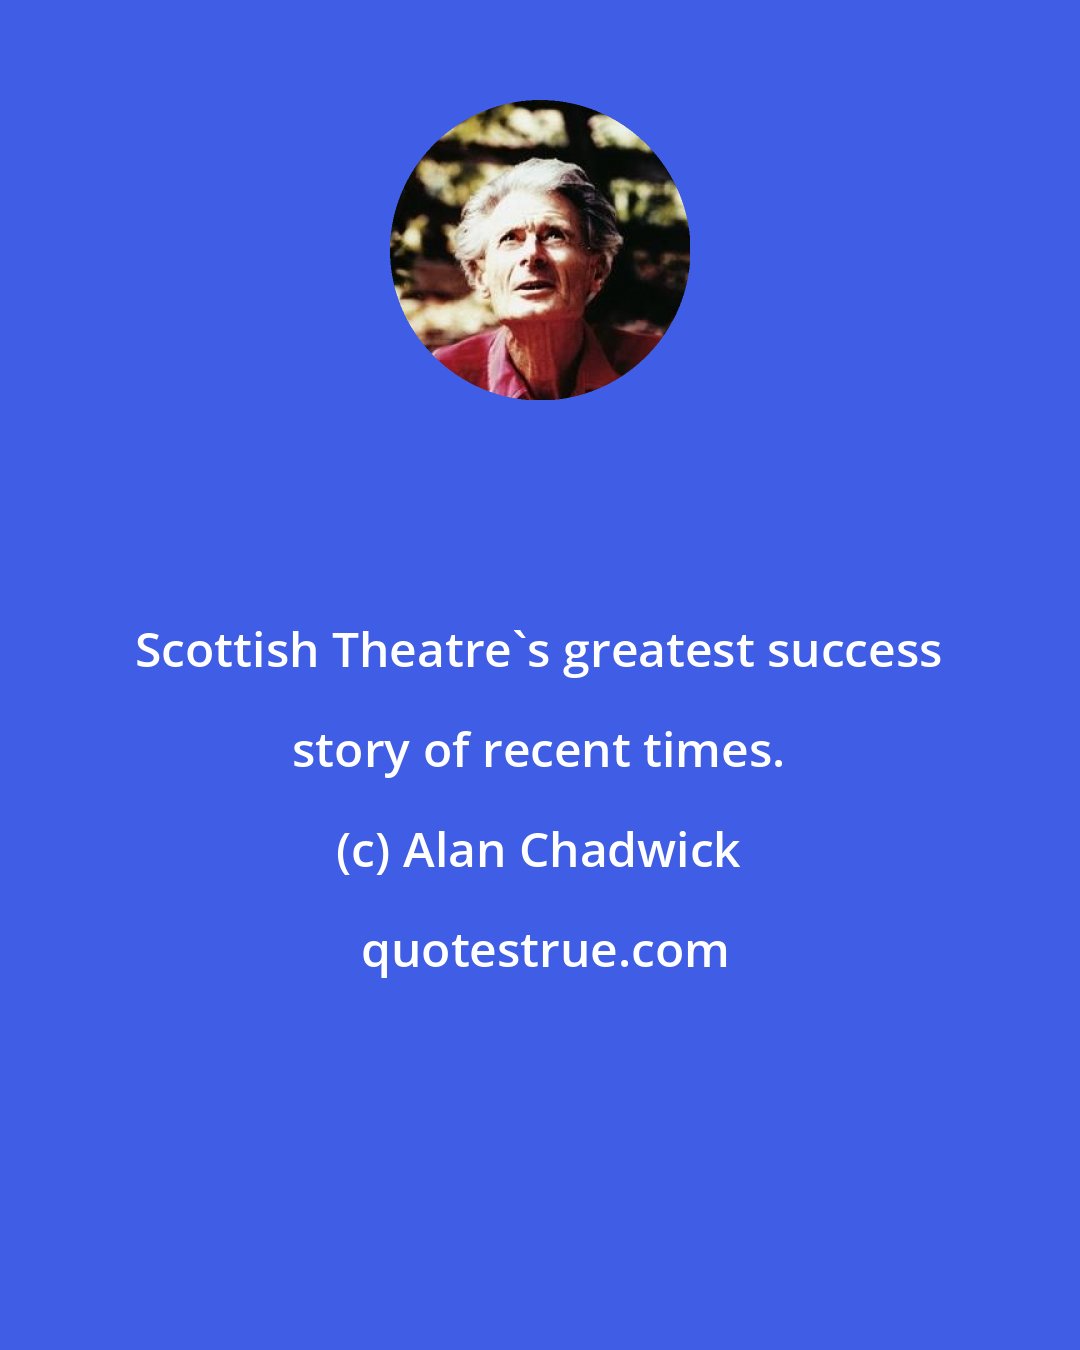 Alan Chadwick: Scottish Theatre's greatest success story of recent times.